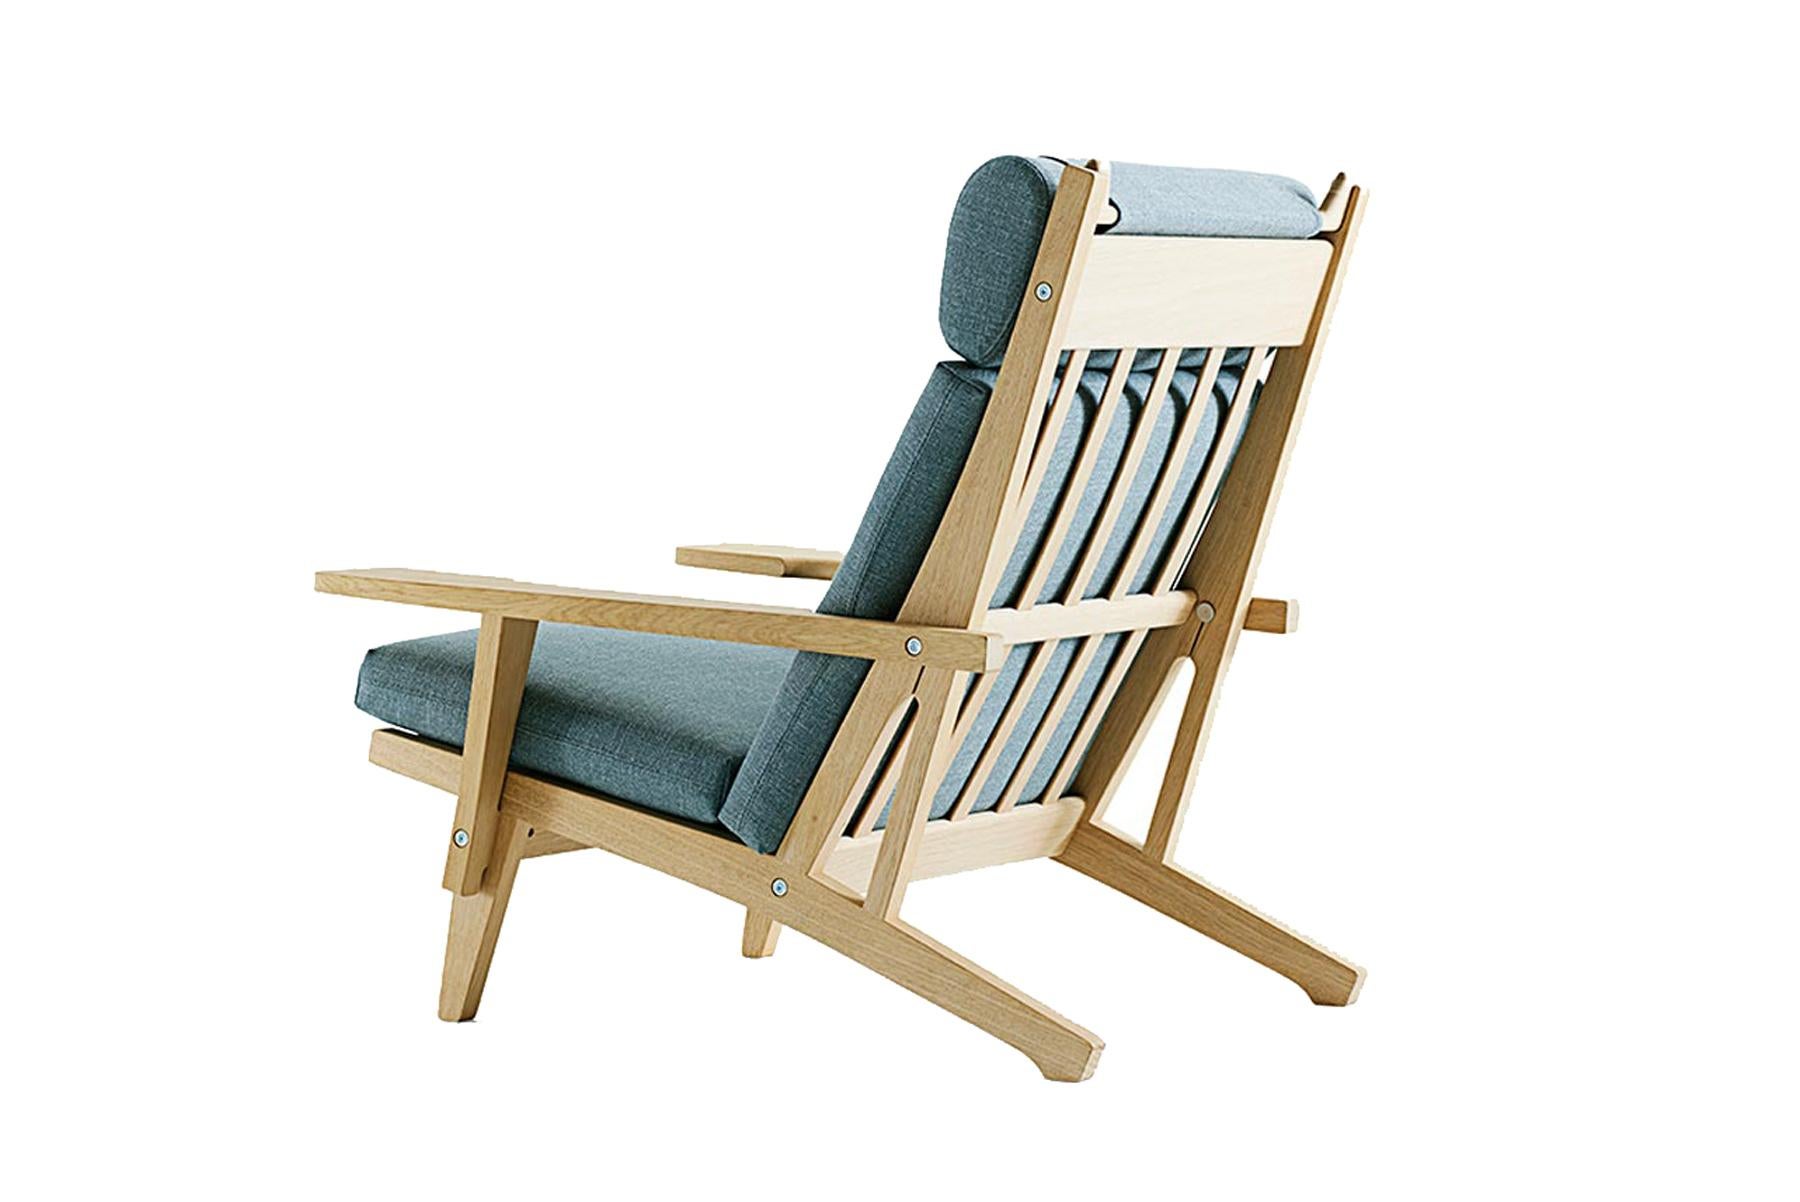 Unglazed Hans Wegner GE-375 Lounge Chair with Arms For Sale